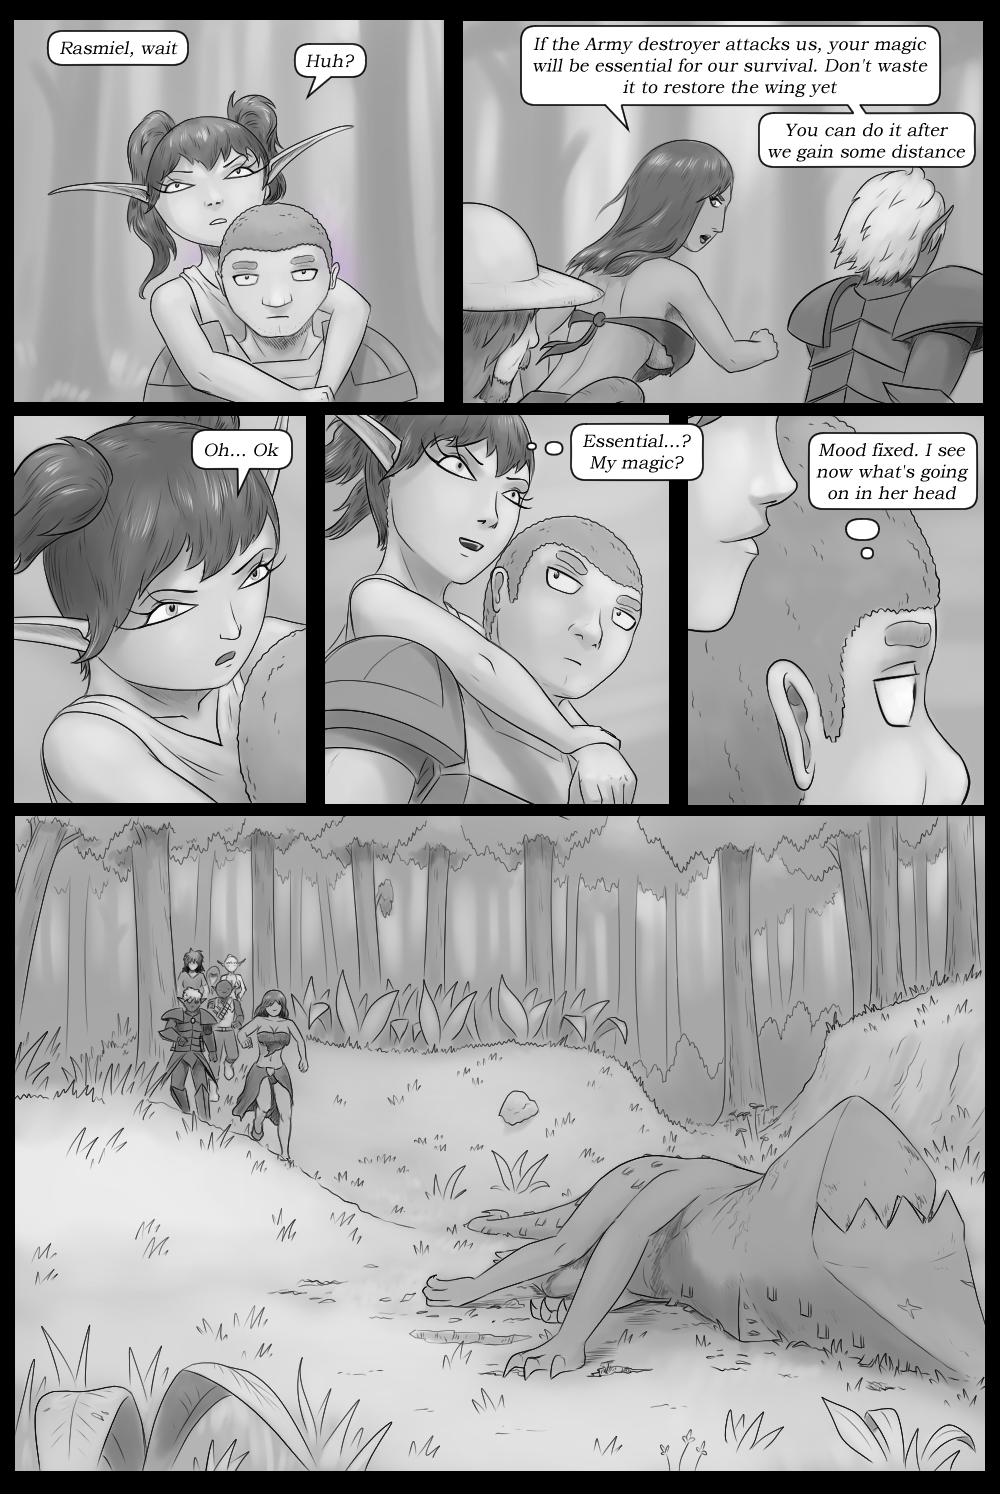 Page 11 - Priorities